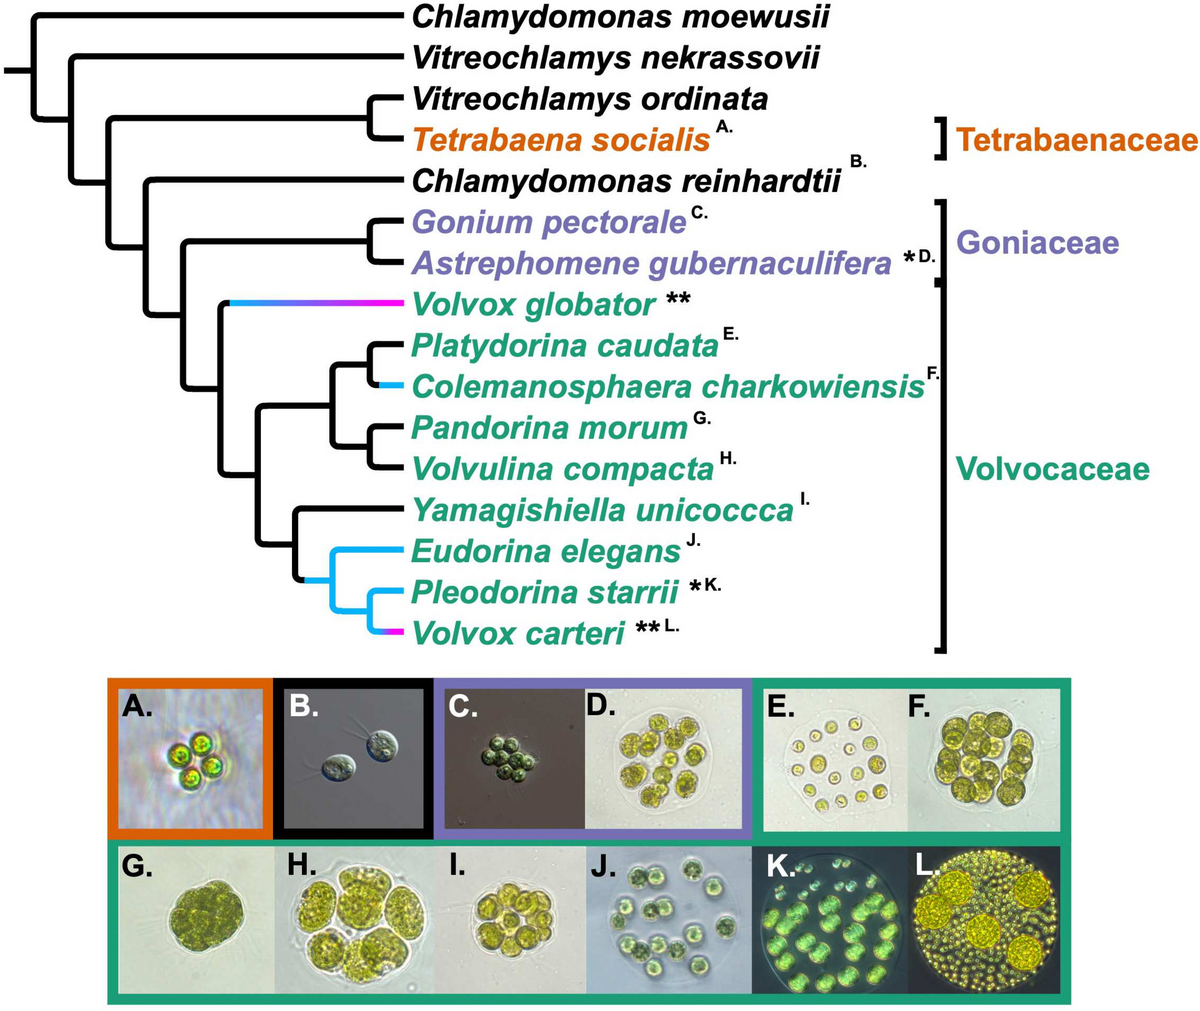 Fossil-calibrated molecular clock data enable reconstruction of steps leading to differentiated multicellularity and anisogamy in the Volvocine algae